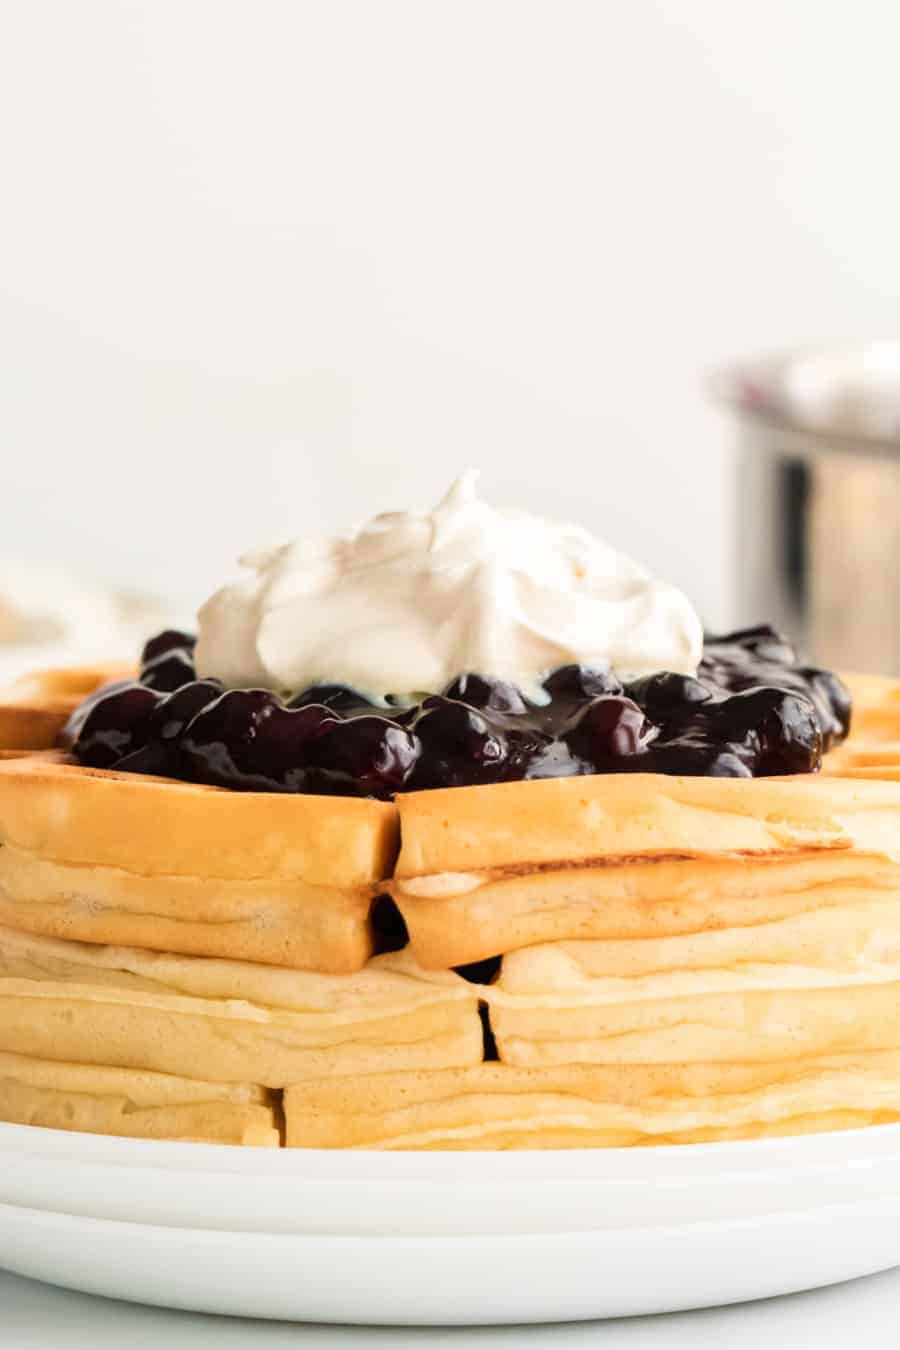 Blueberry Topping for Waffles Recipe